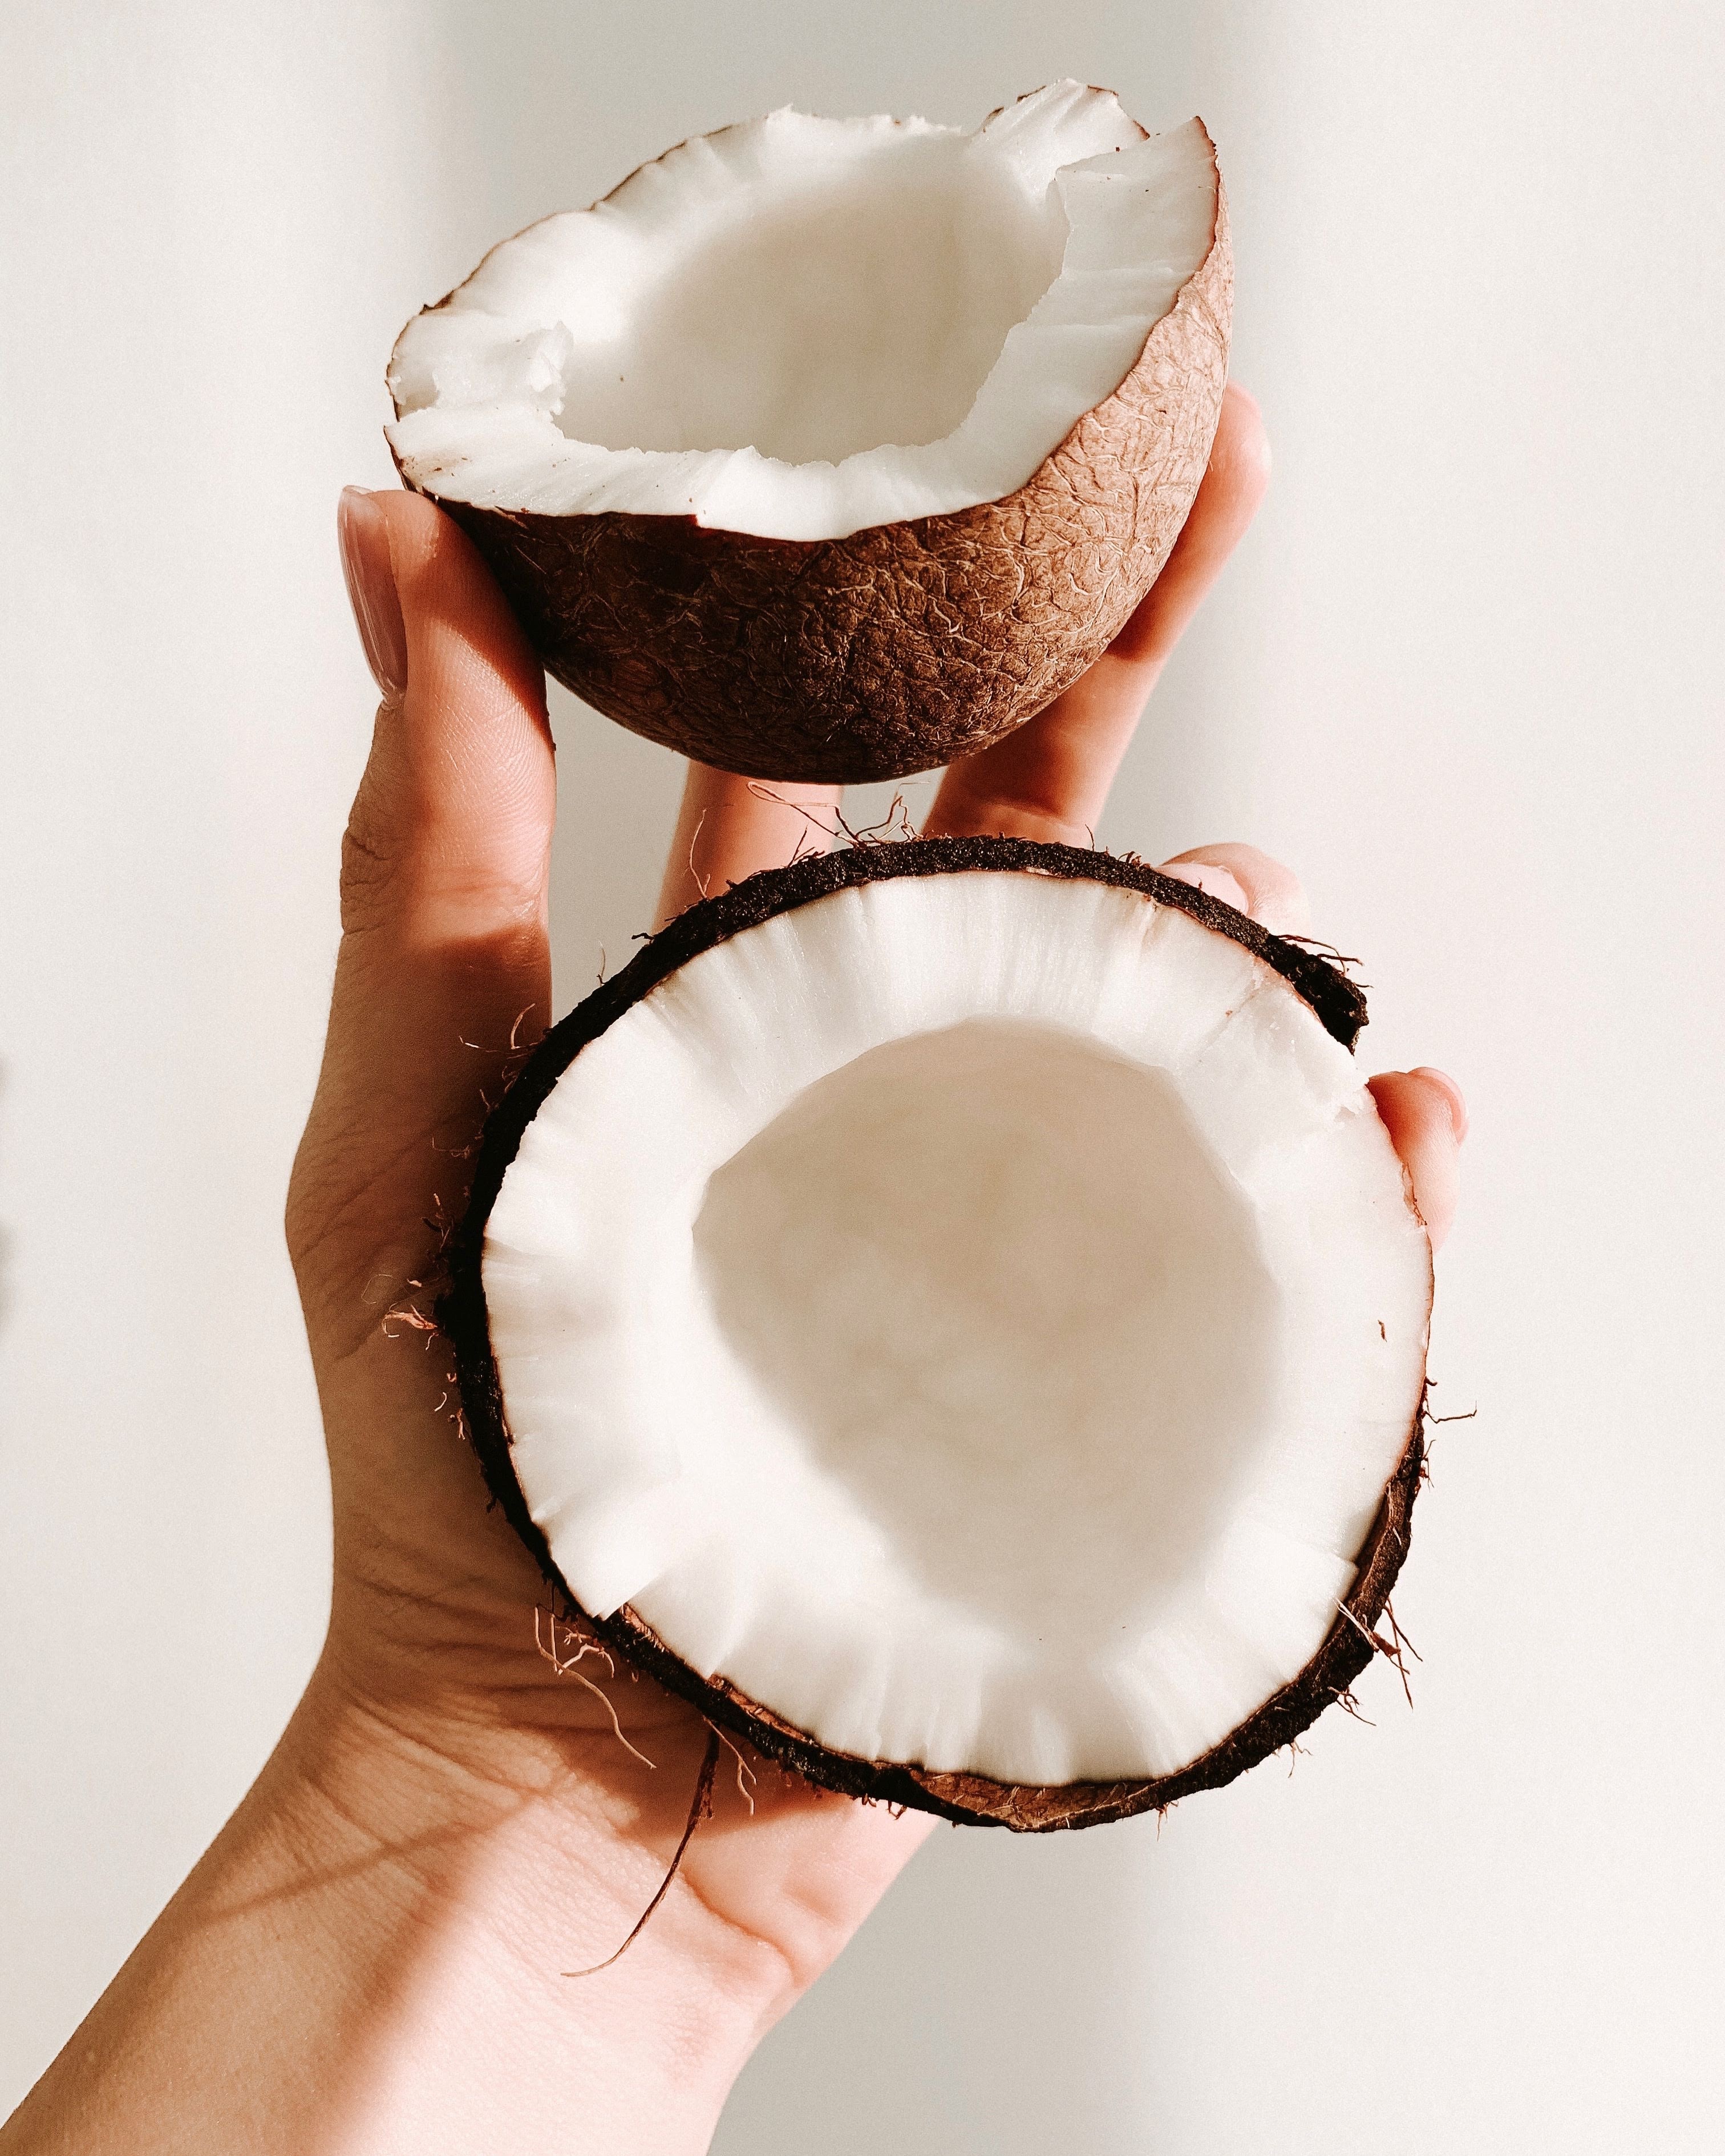 Is virgin coconut oil good for psoriasis? - Tim Grigsby